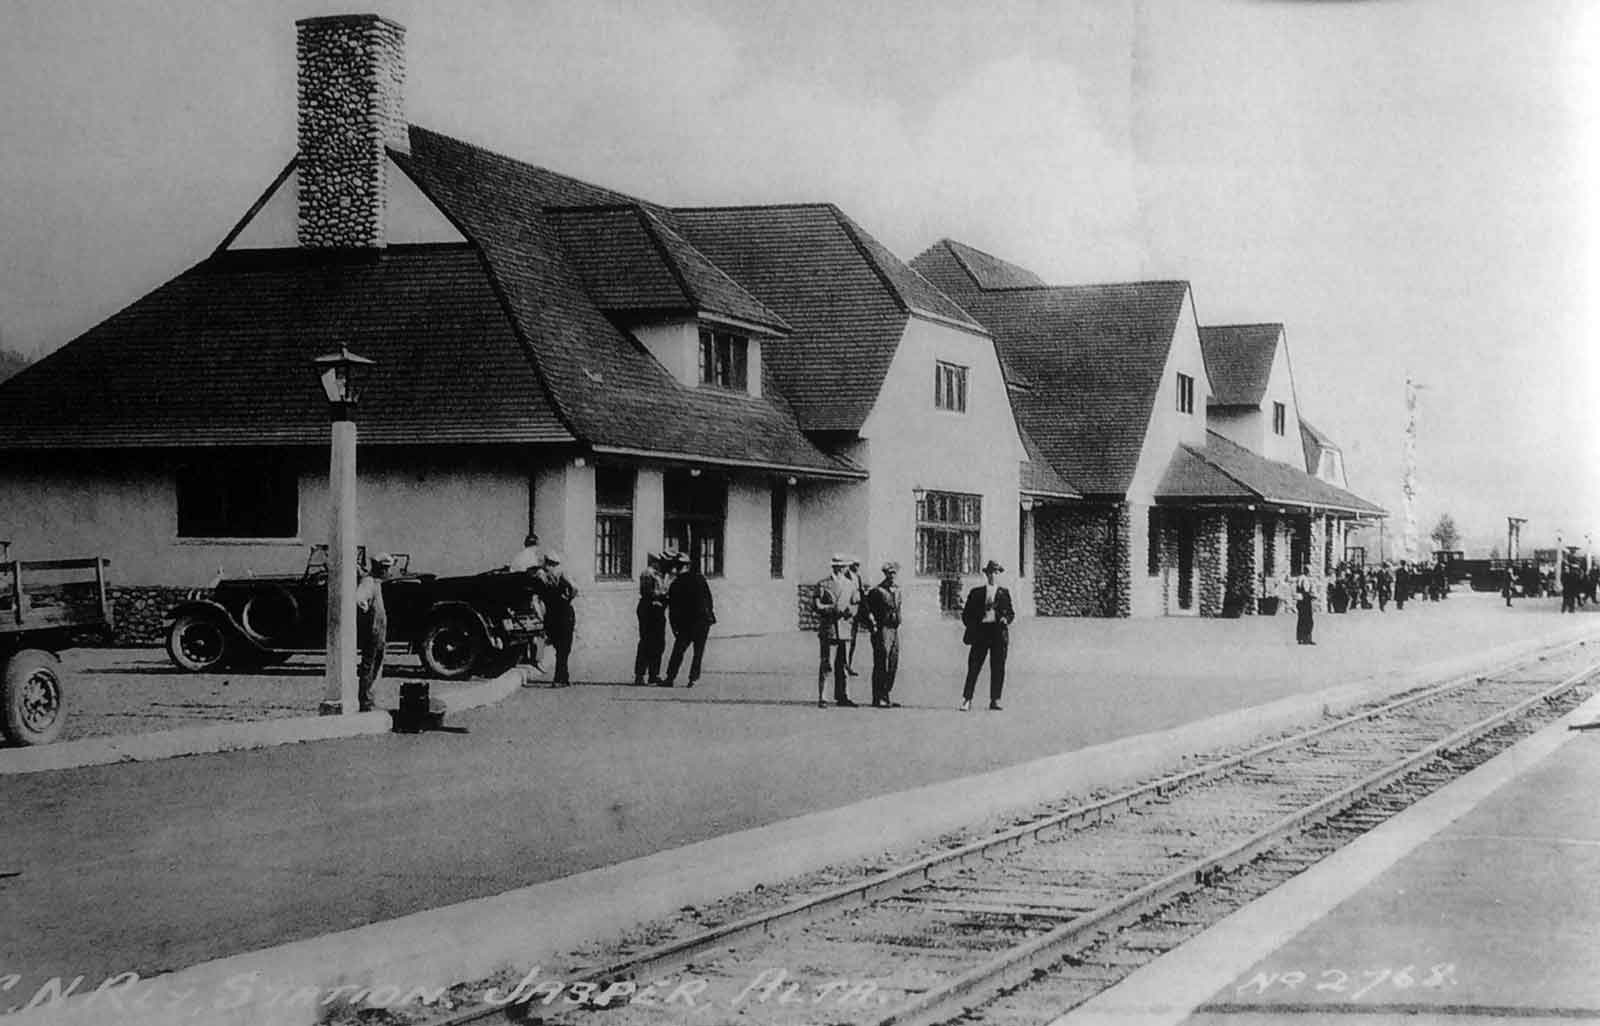 Canadian National Railways station at Jasper, late 1920s